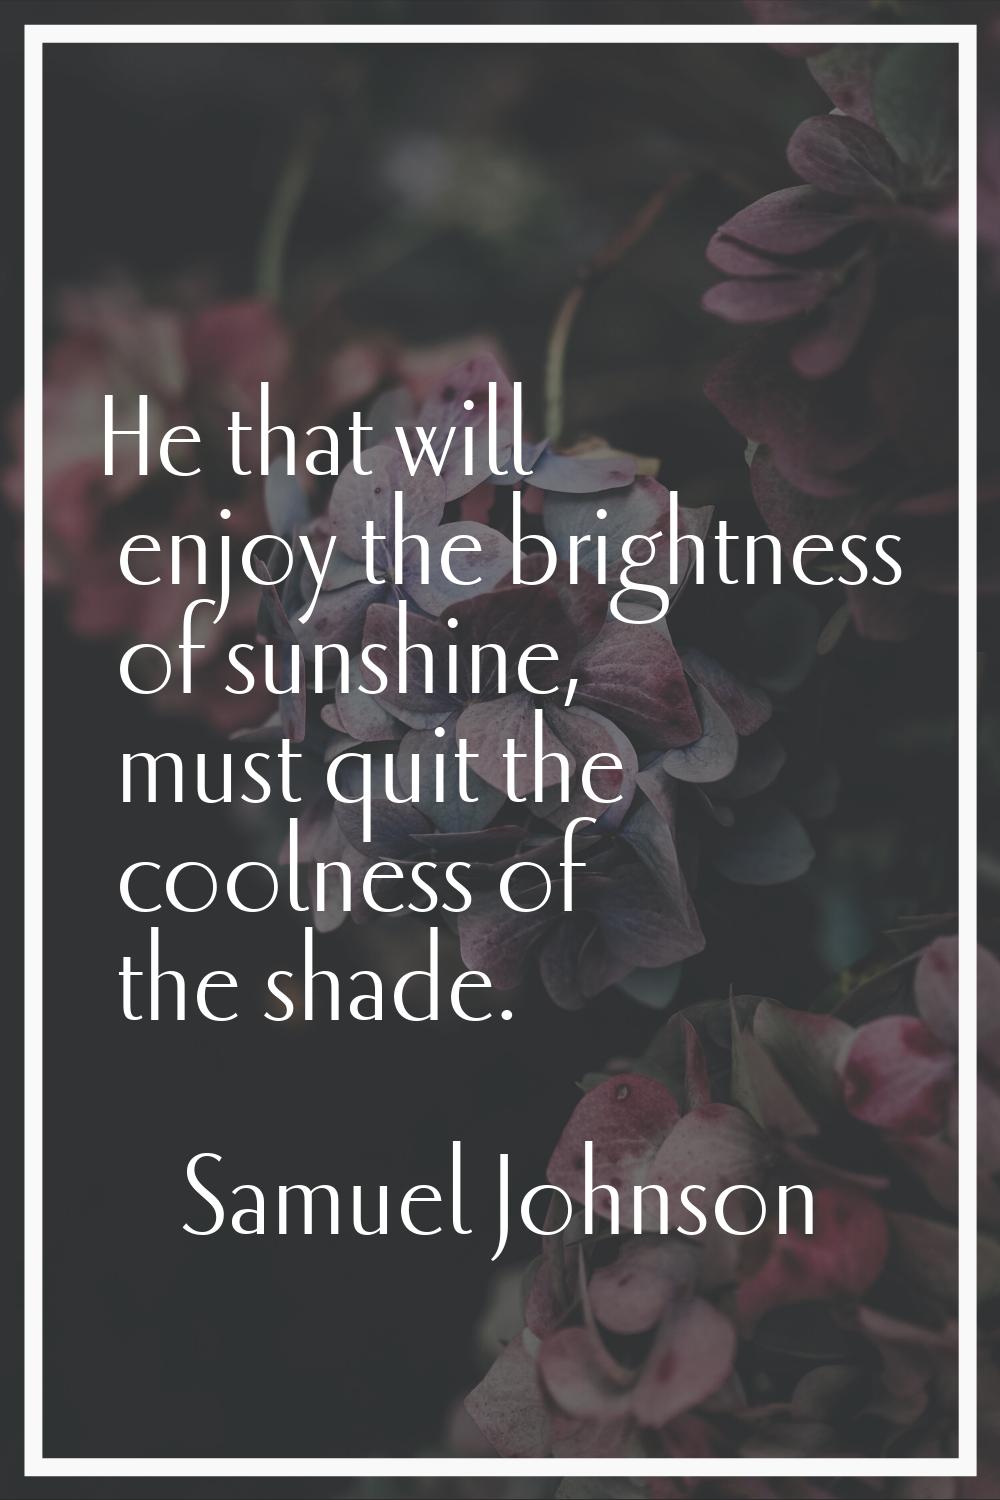 He that will enjoy the brightness of sunshine, must quit the coolness of the shade.